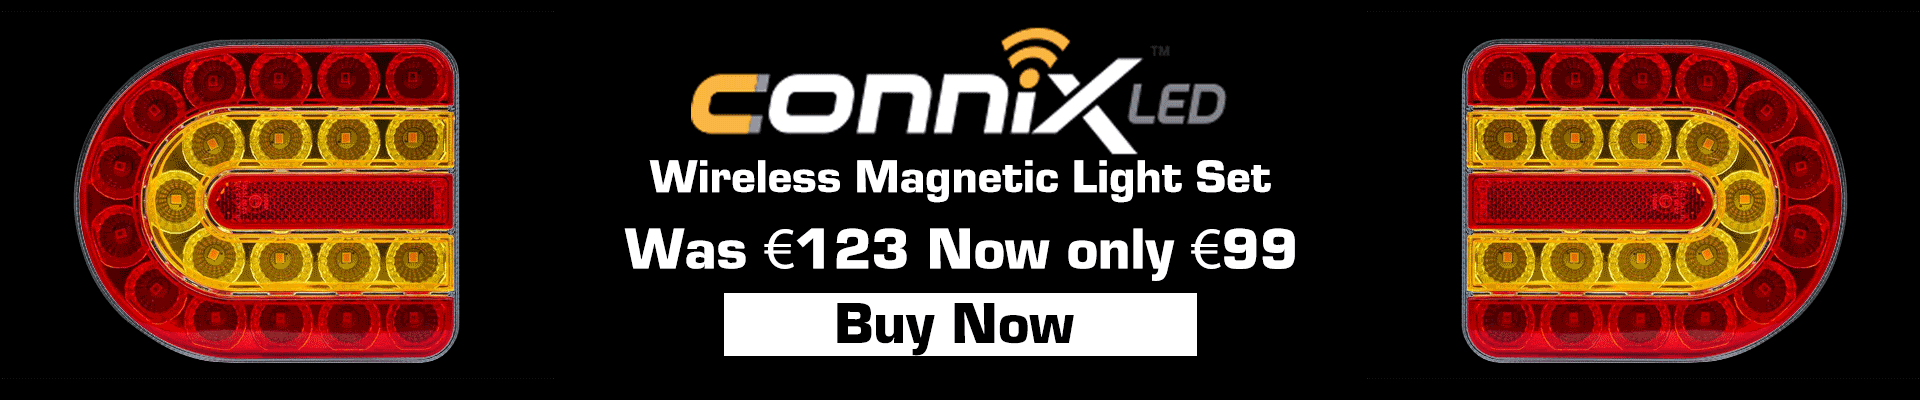 Connix LED Wireless Magnetic Light Set for Sale